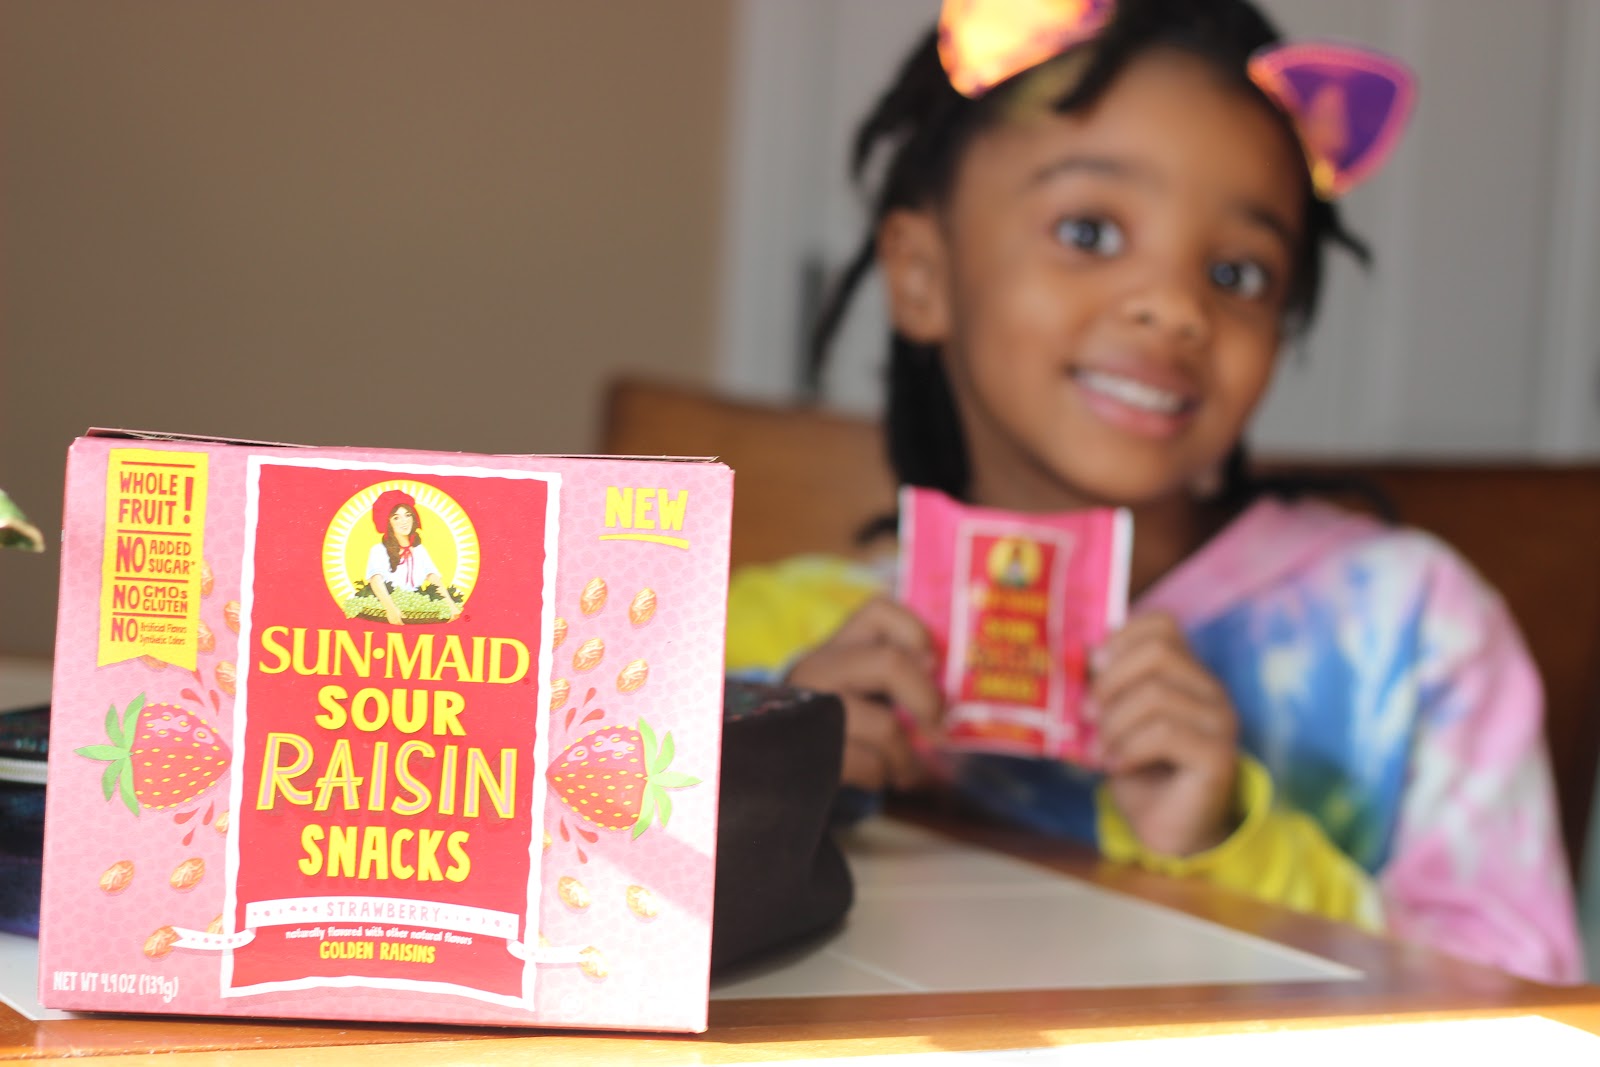 Close up of Sun-Maid Sour Snacks with young girl in background holding snack pack.